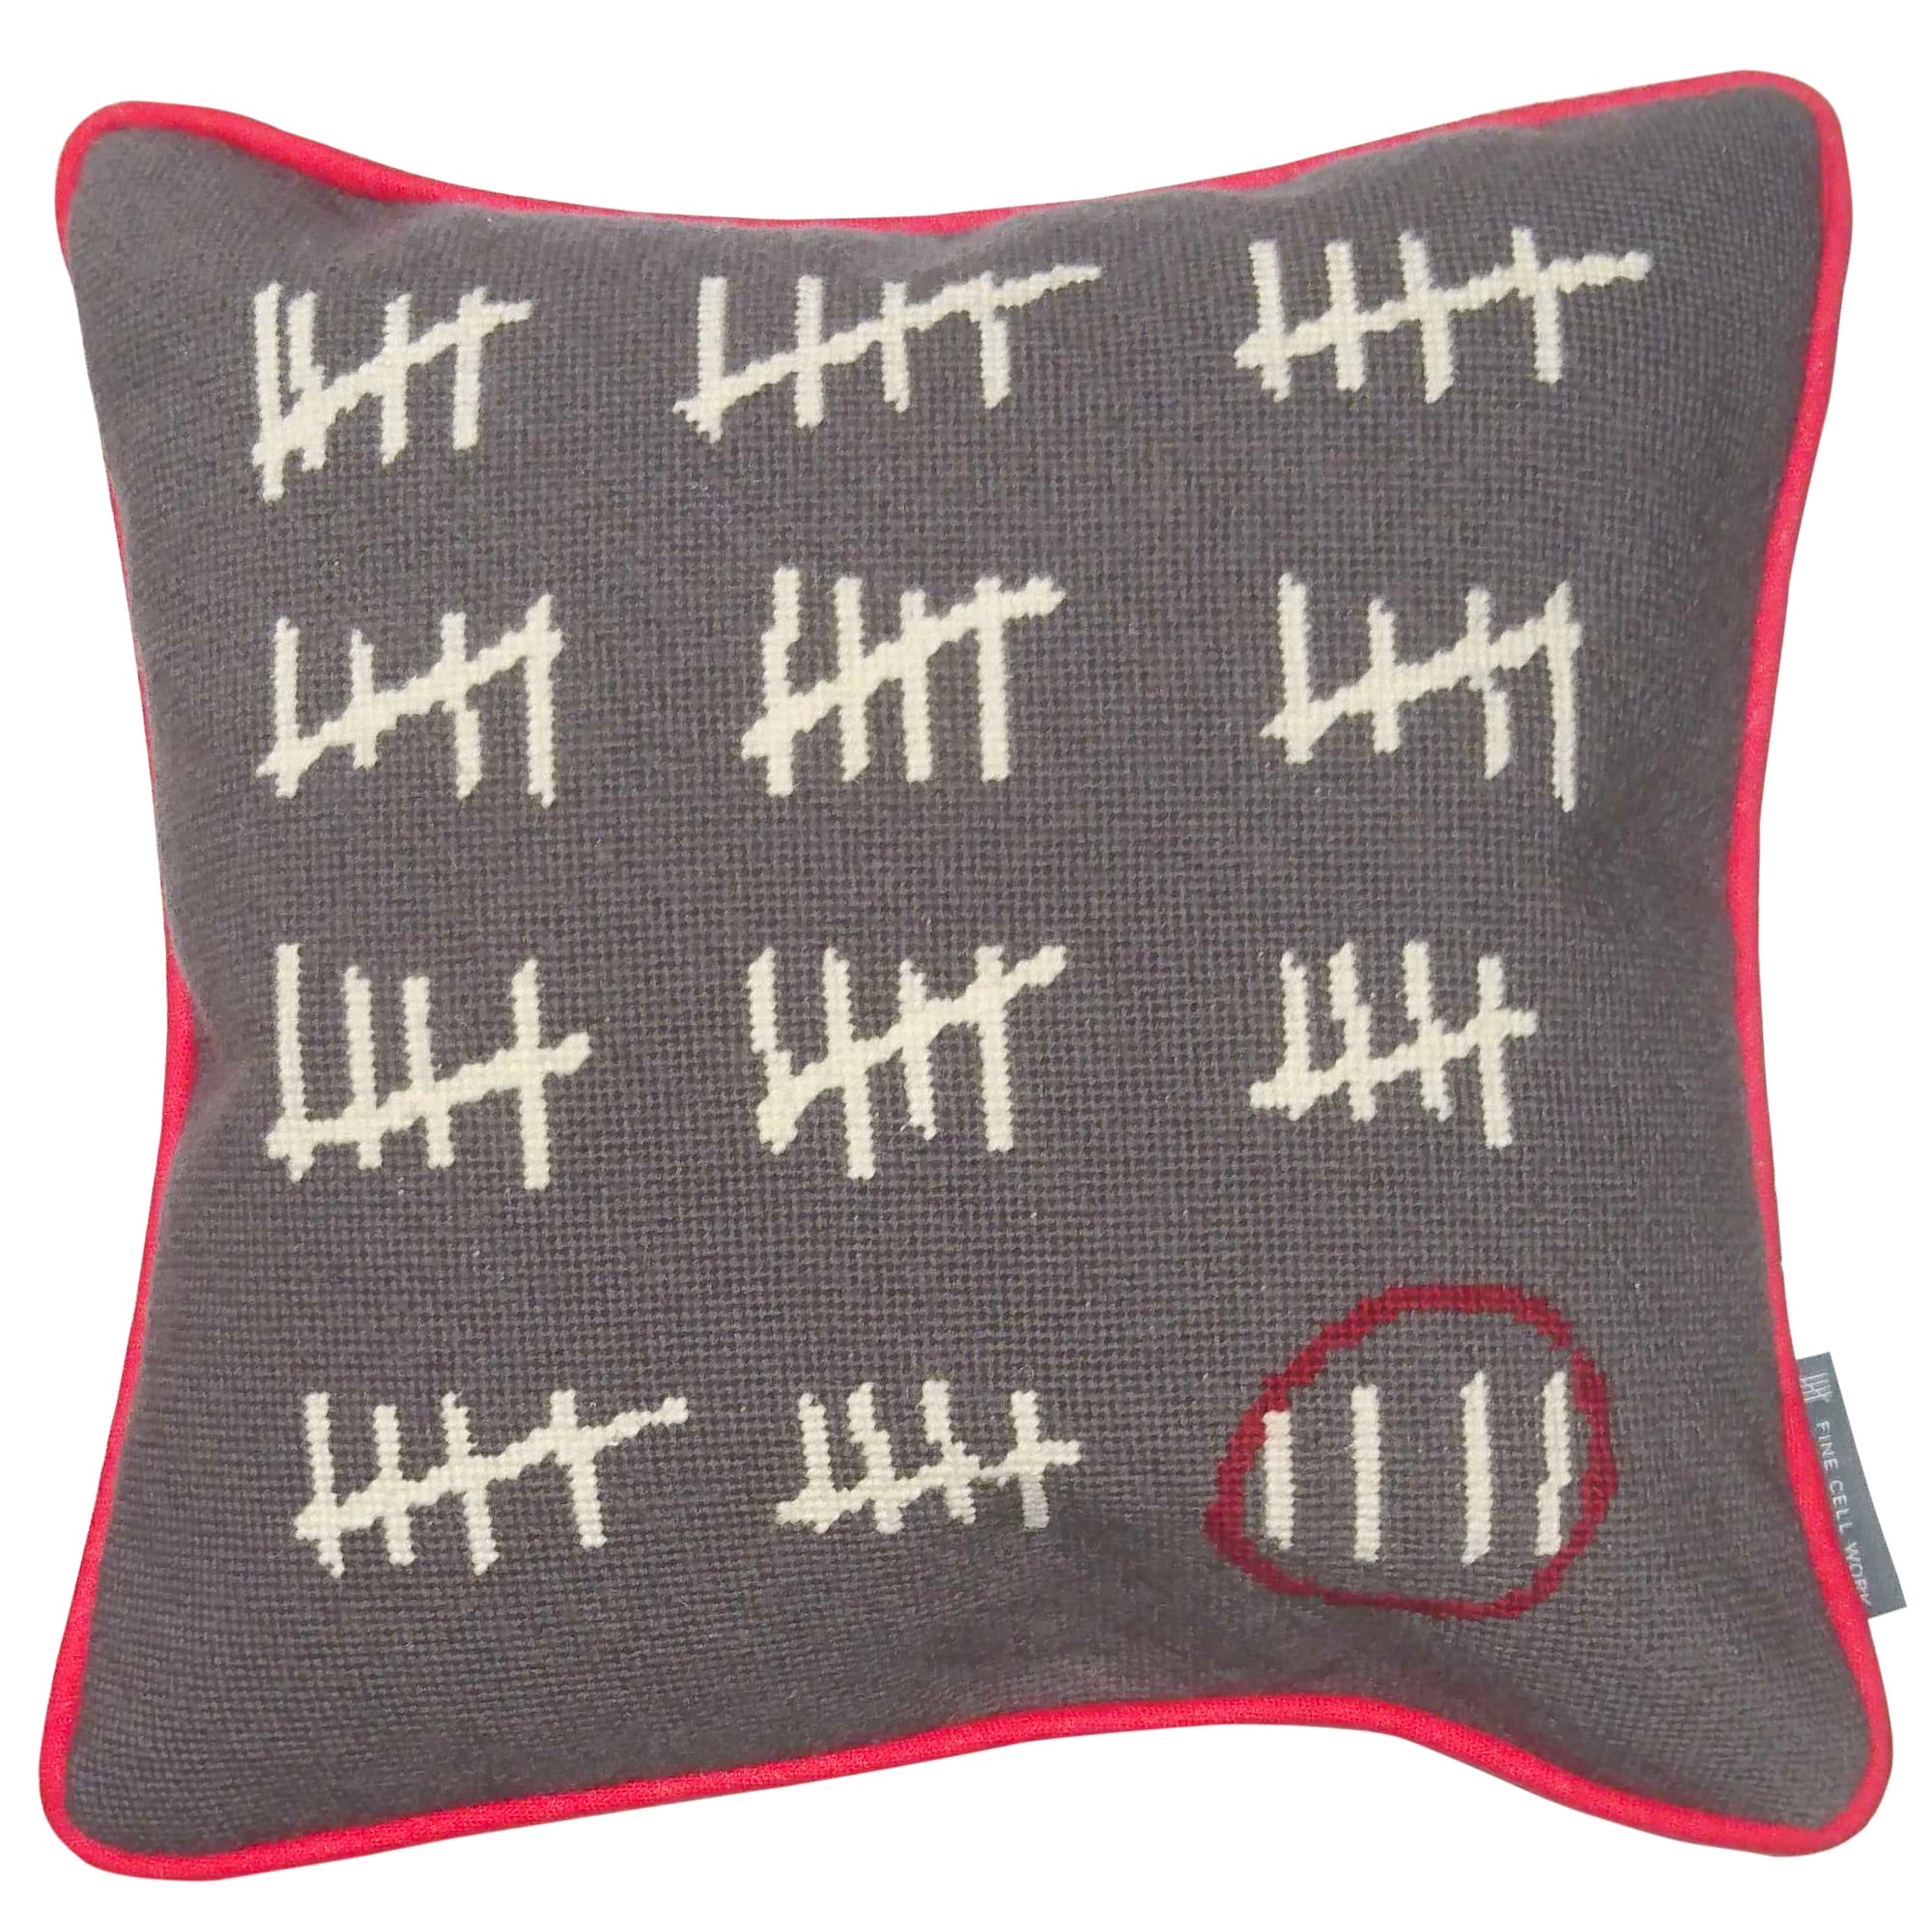 Fine-Cell-Work-AA-Gill-Prison-Calendar-Cushion-Grey-Red-Square.jpg